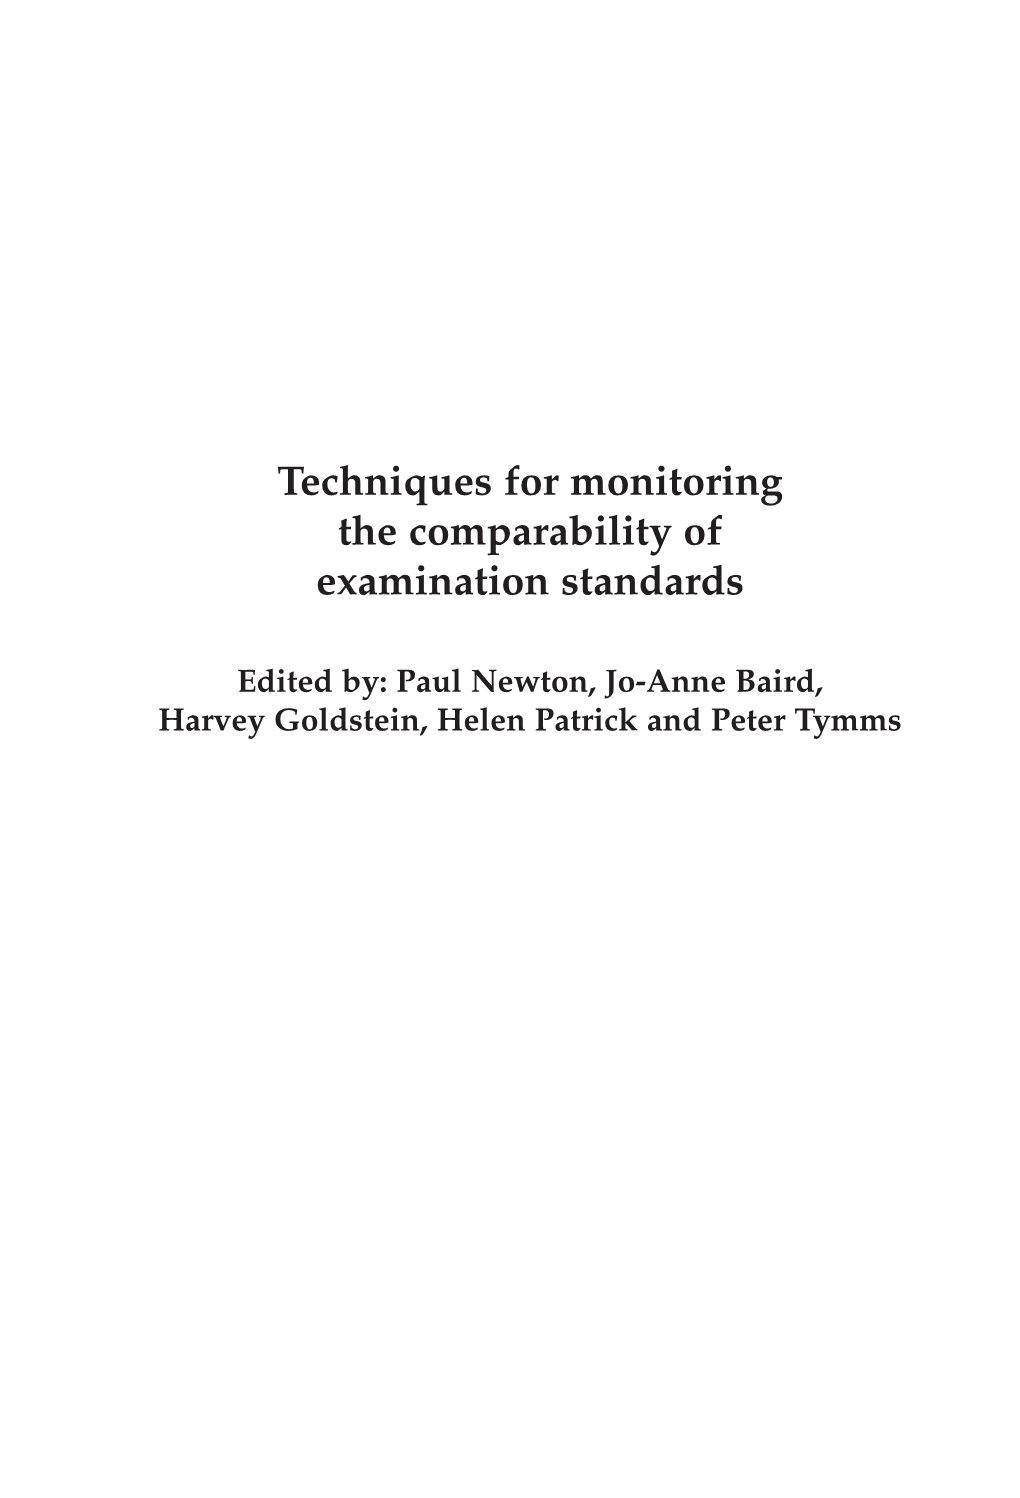 Techniques for Monitoring the Comparability of Examination Standards